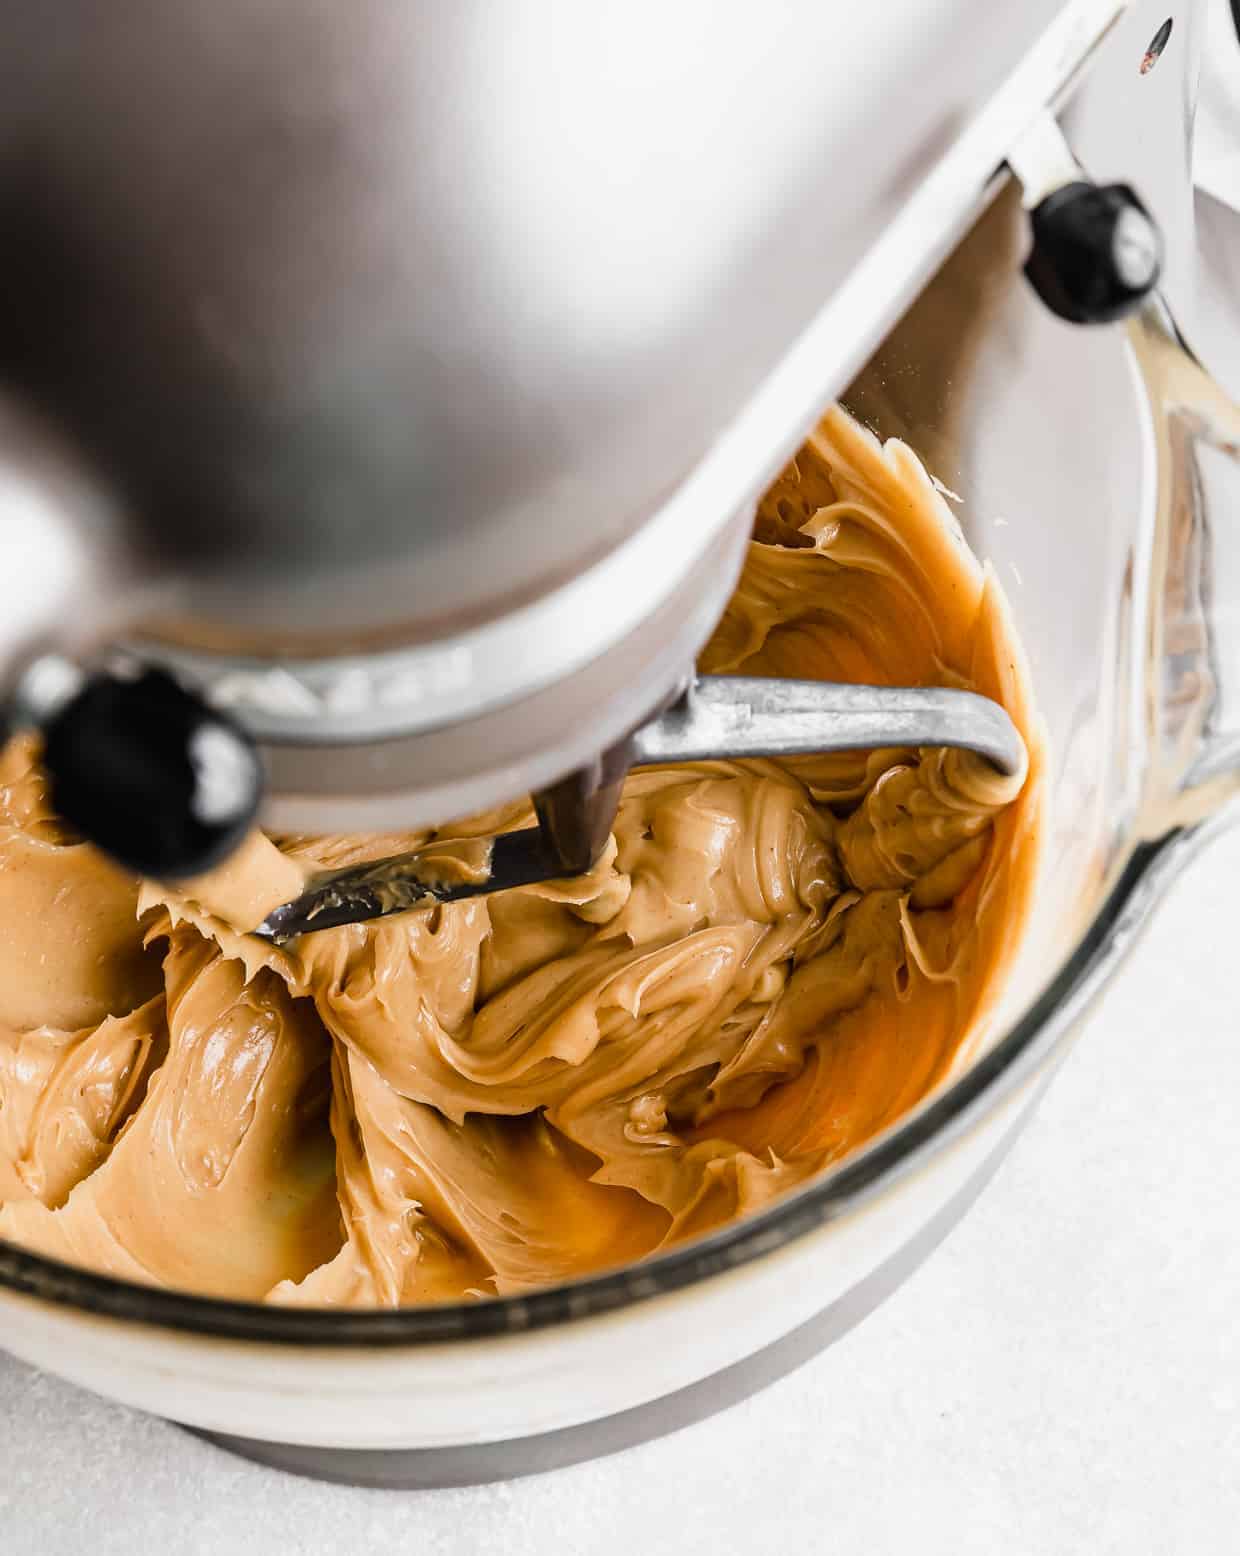 Creamy Peanut Butter Frosting being mixed in a stand mixer.